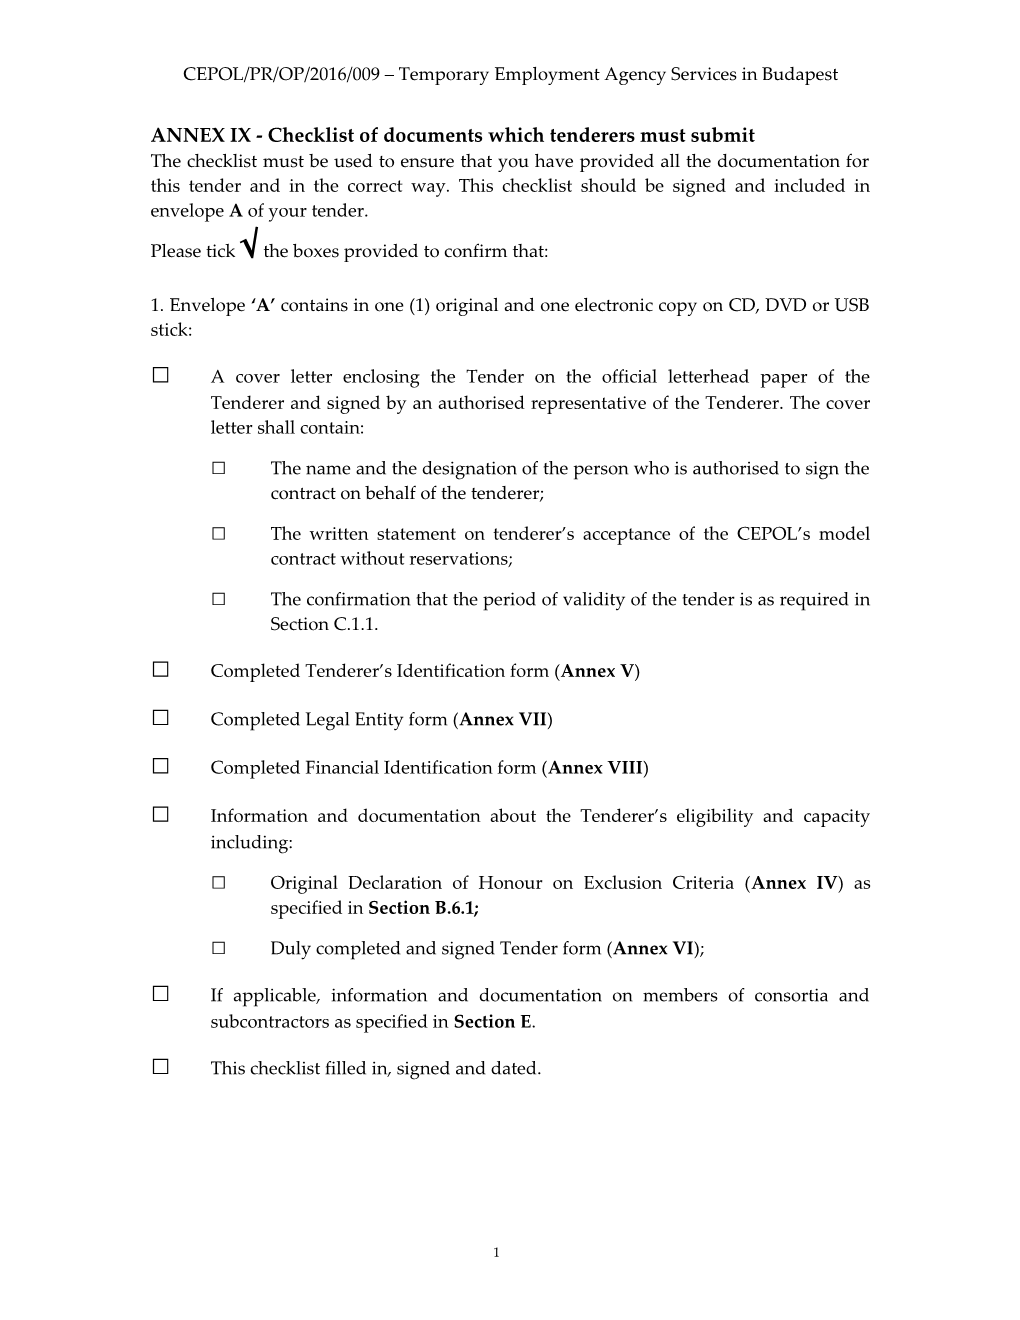 ANNEX II TECHNICAL PROPOSAL FORM (For Lot 1 Professional Support Staff)